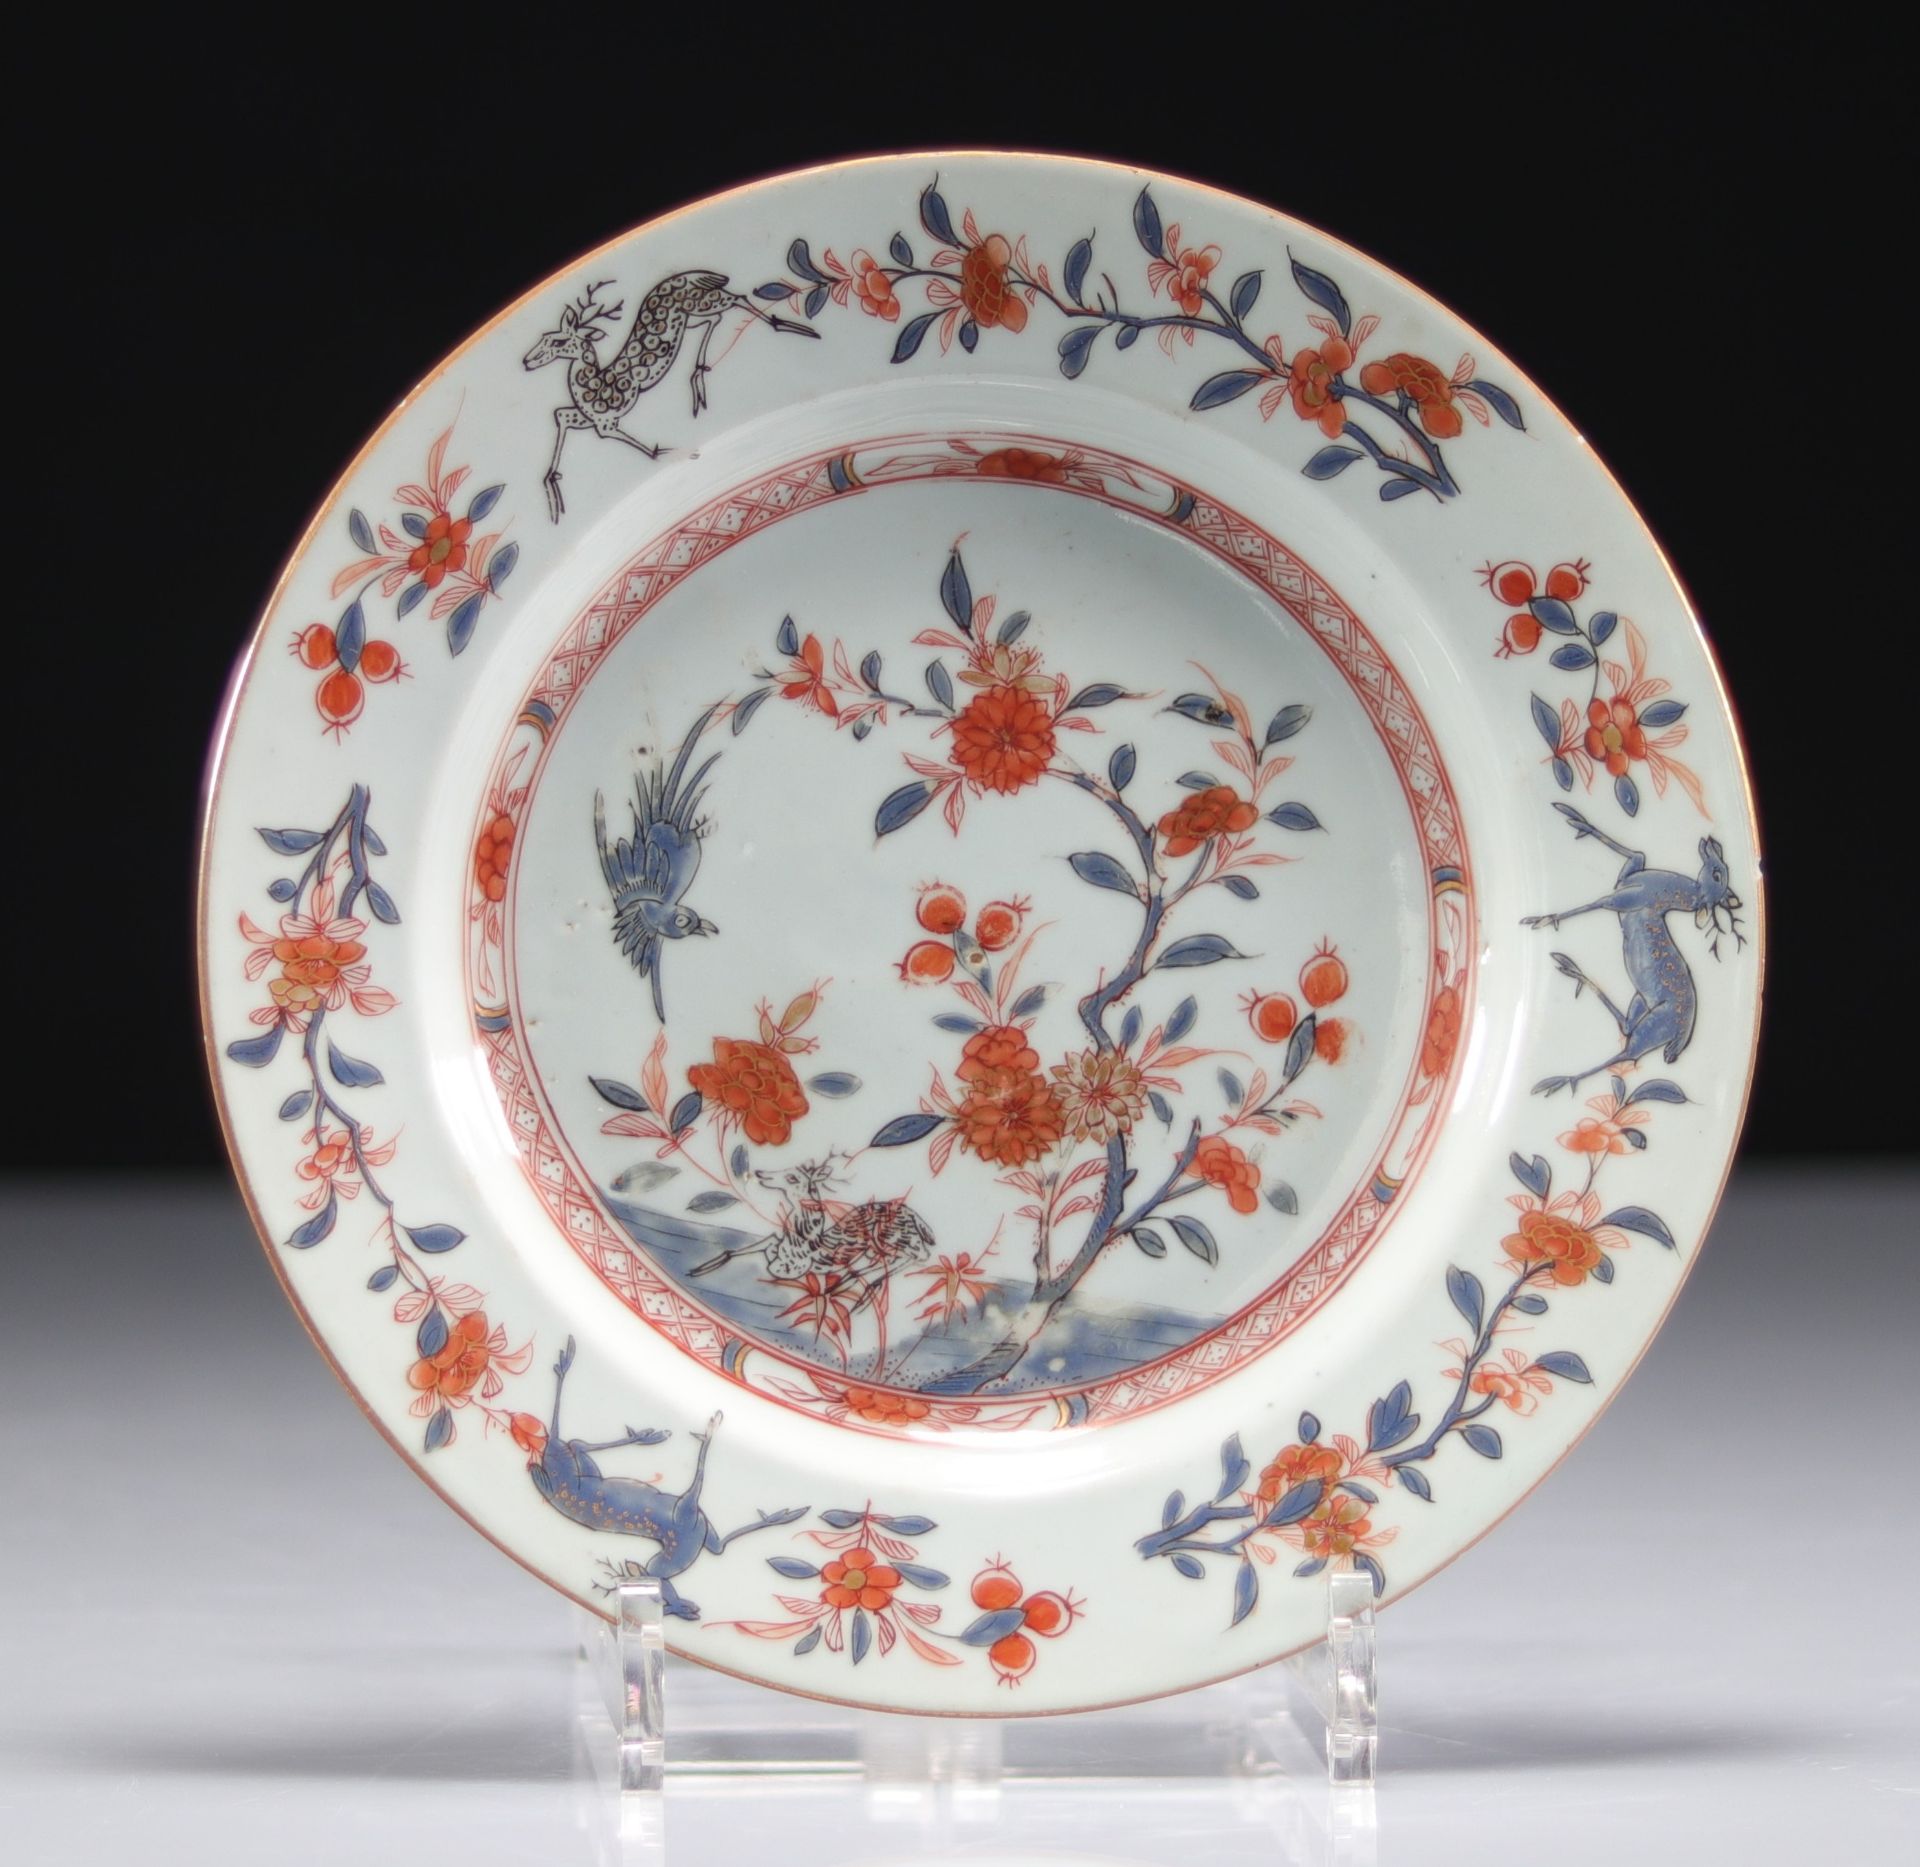 18th century porcelain plate decorated with deer